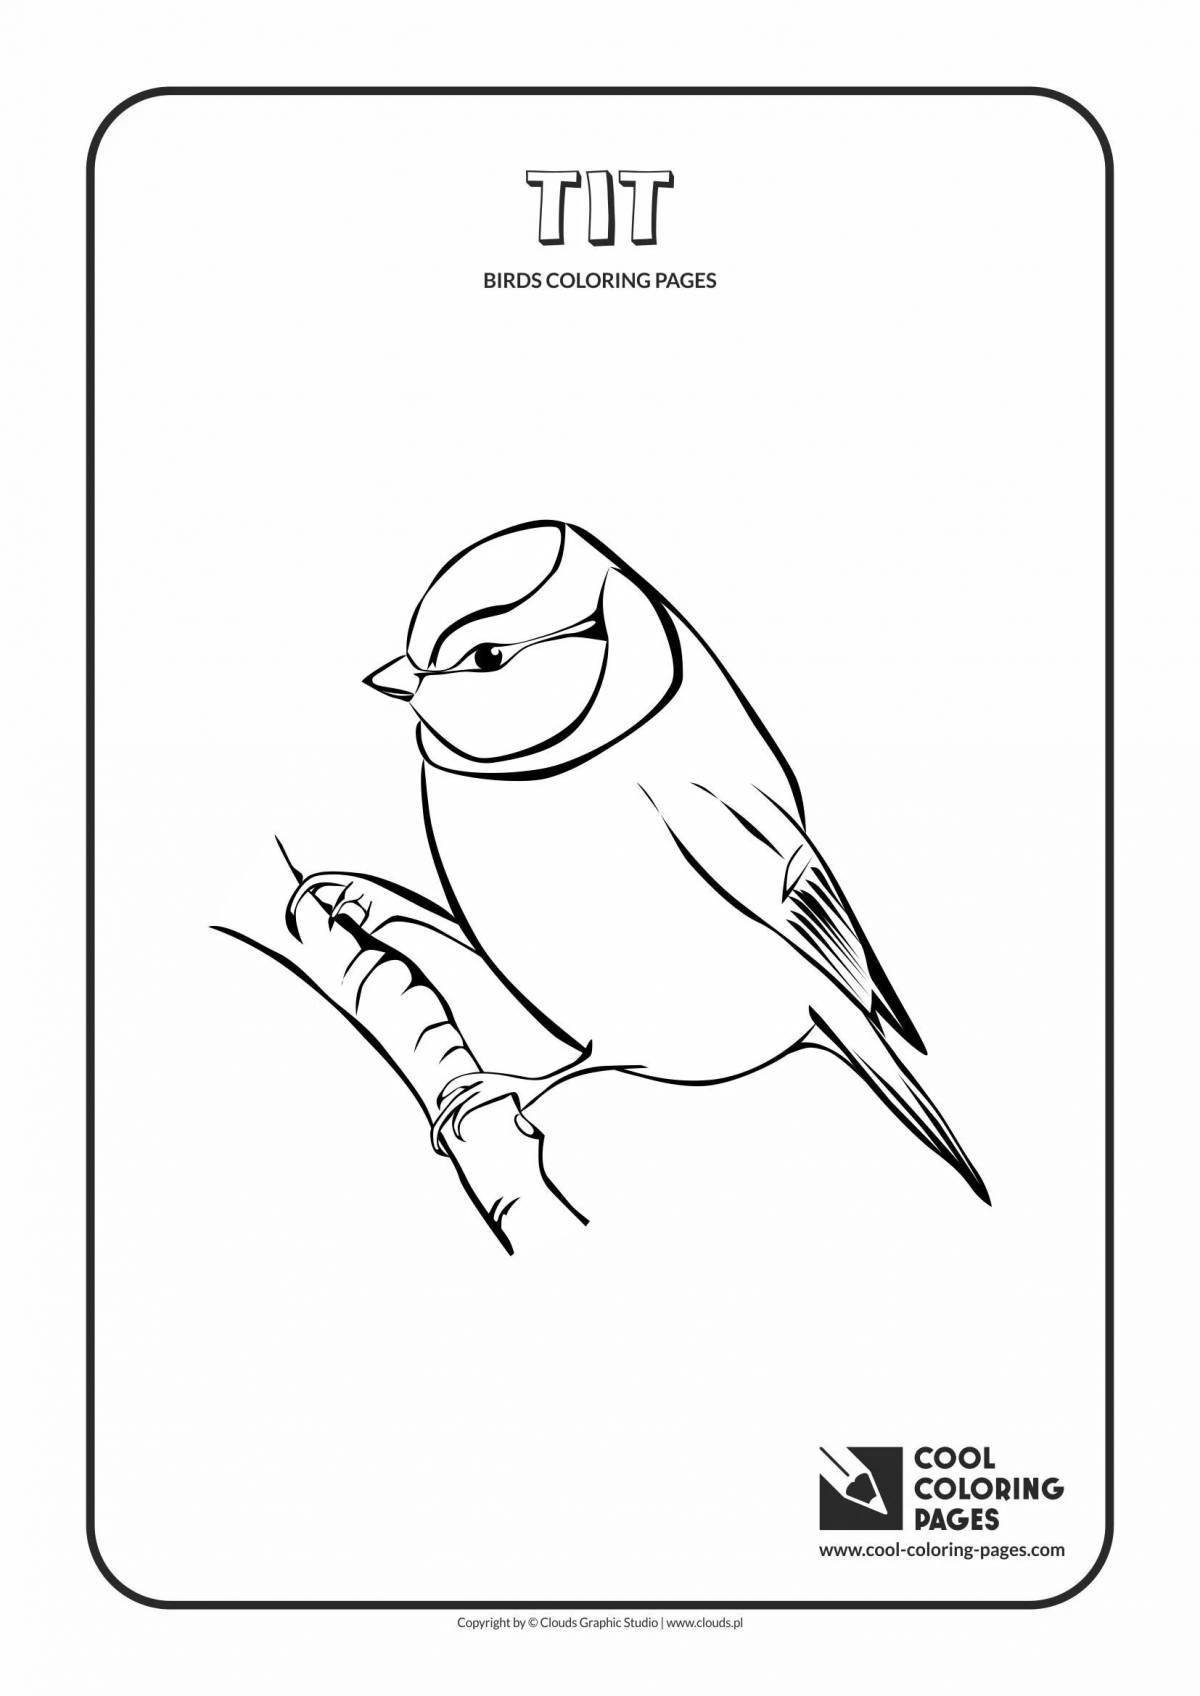 Live tit coloring for children 2-3 years old